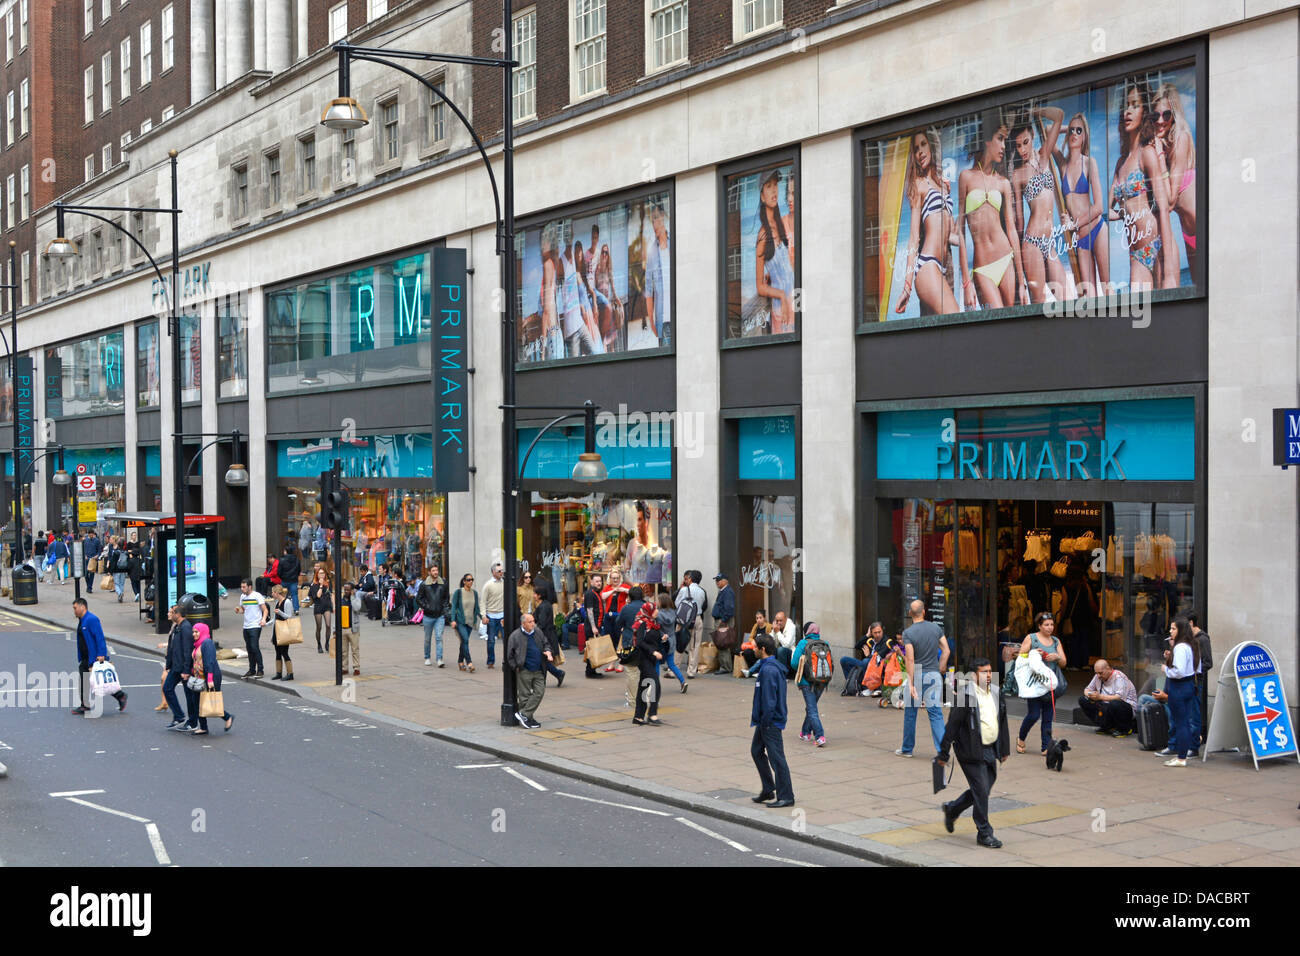 Busy pavement with shoppers outside Primark fast fashion clothing retail business shop front & store windows Oxford Street West End London England UK Stock Photo